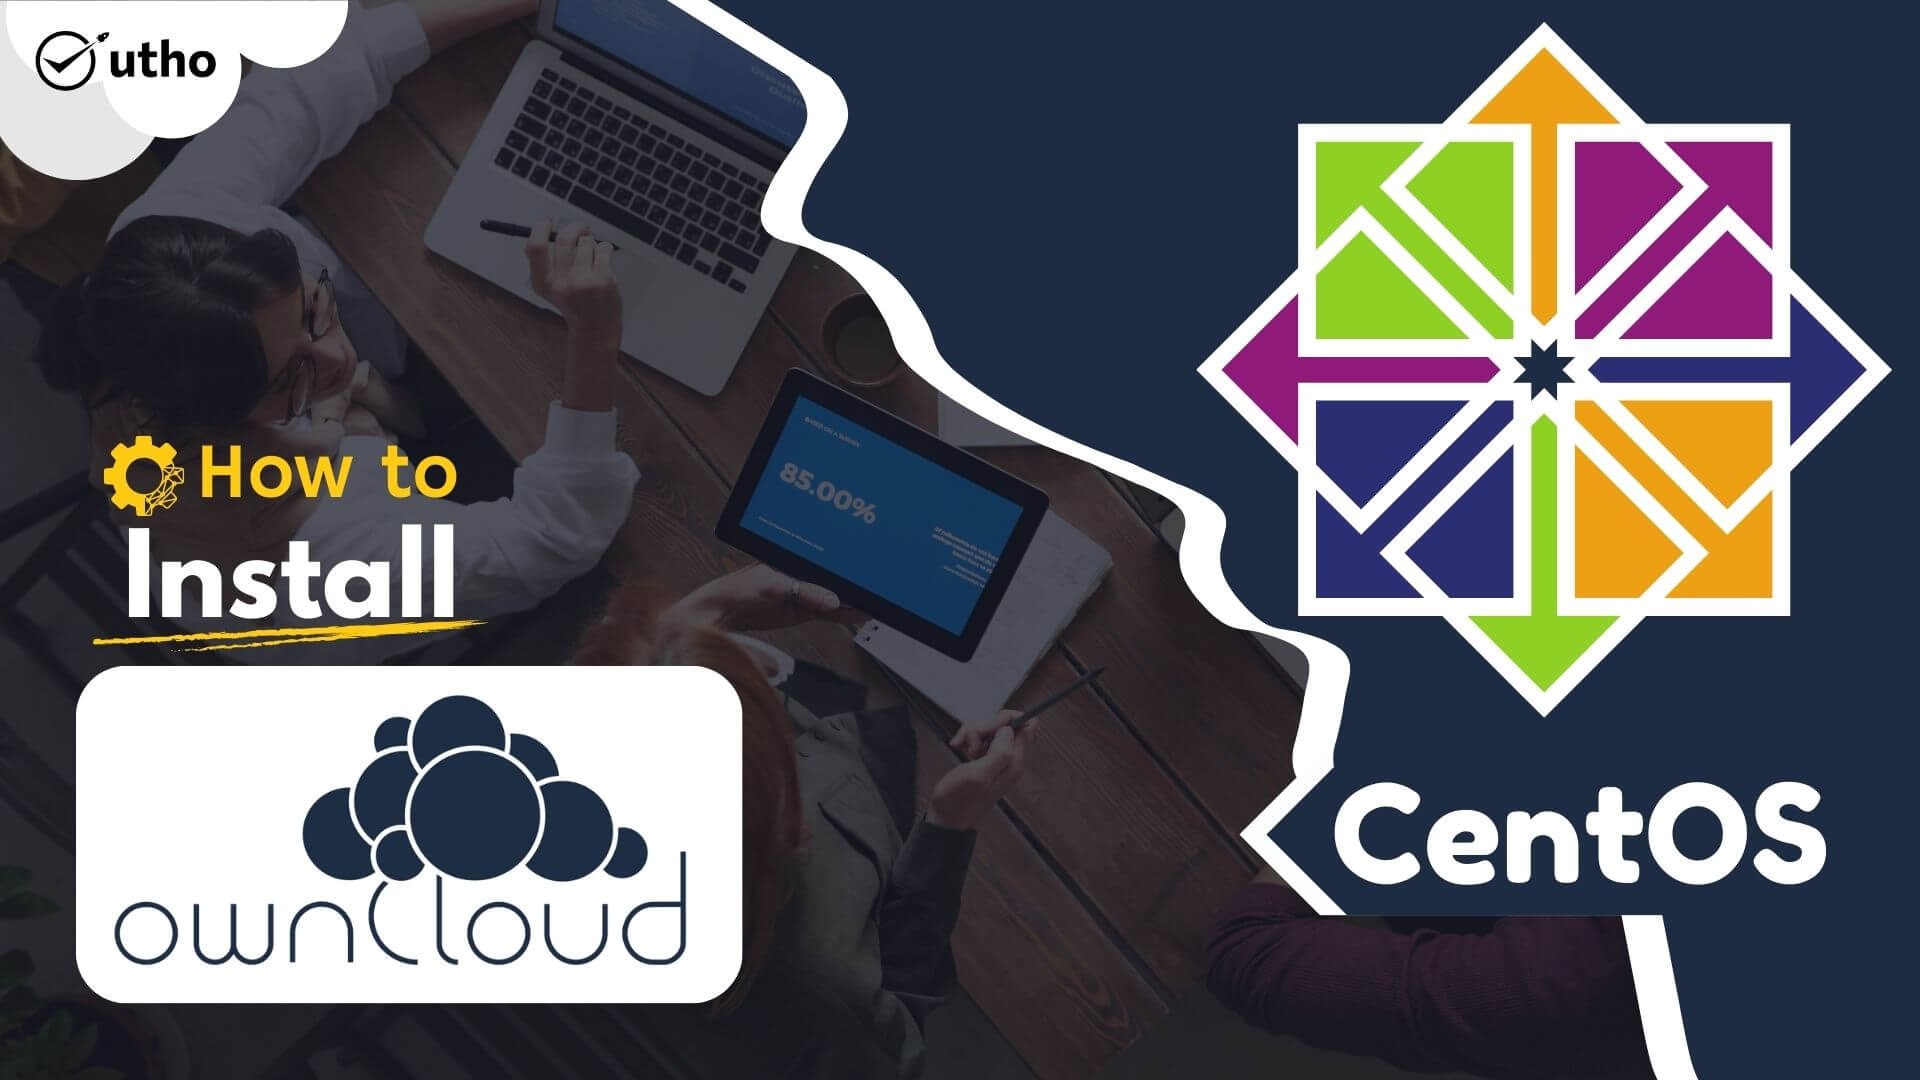 How to install owncloud on Centos